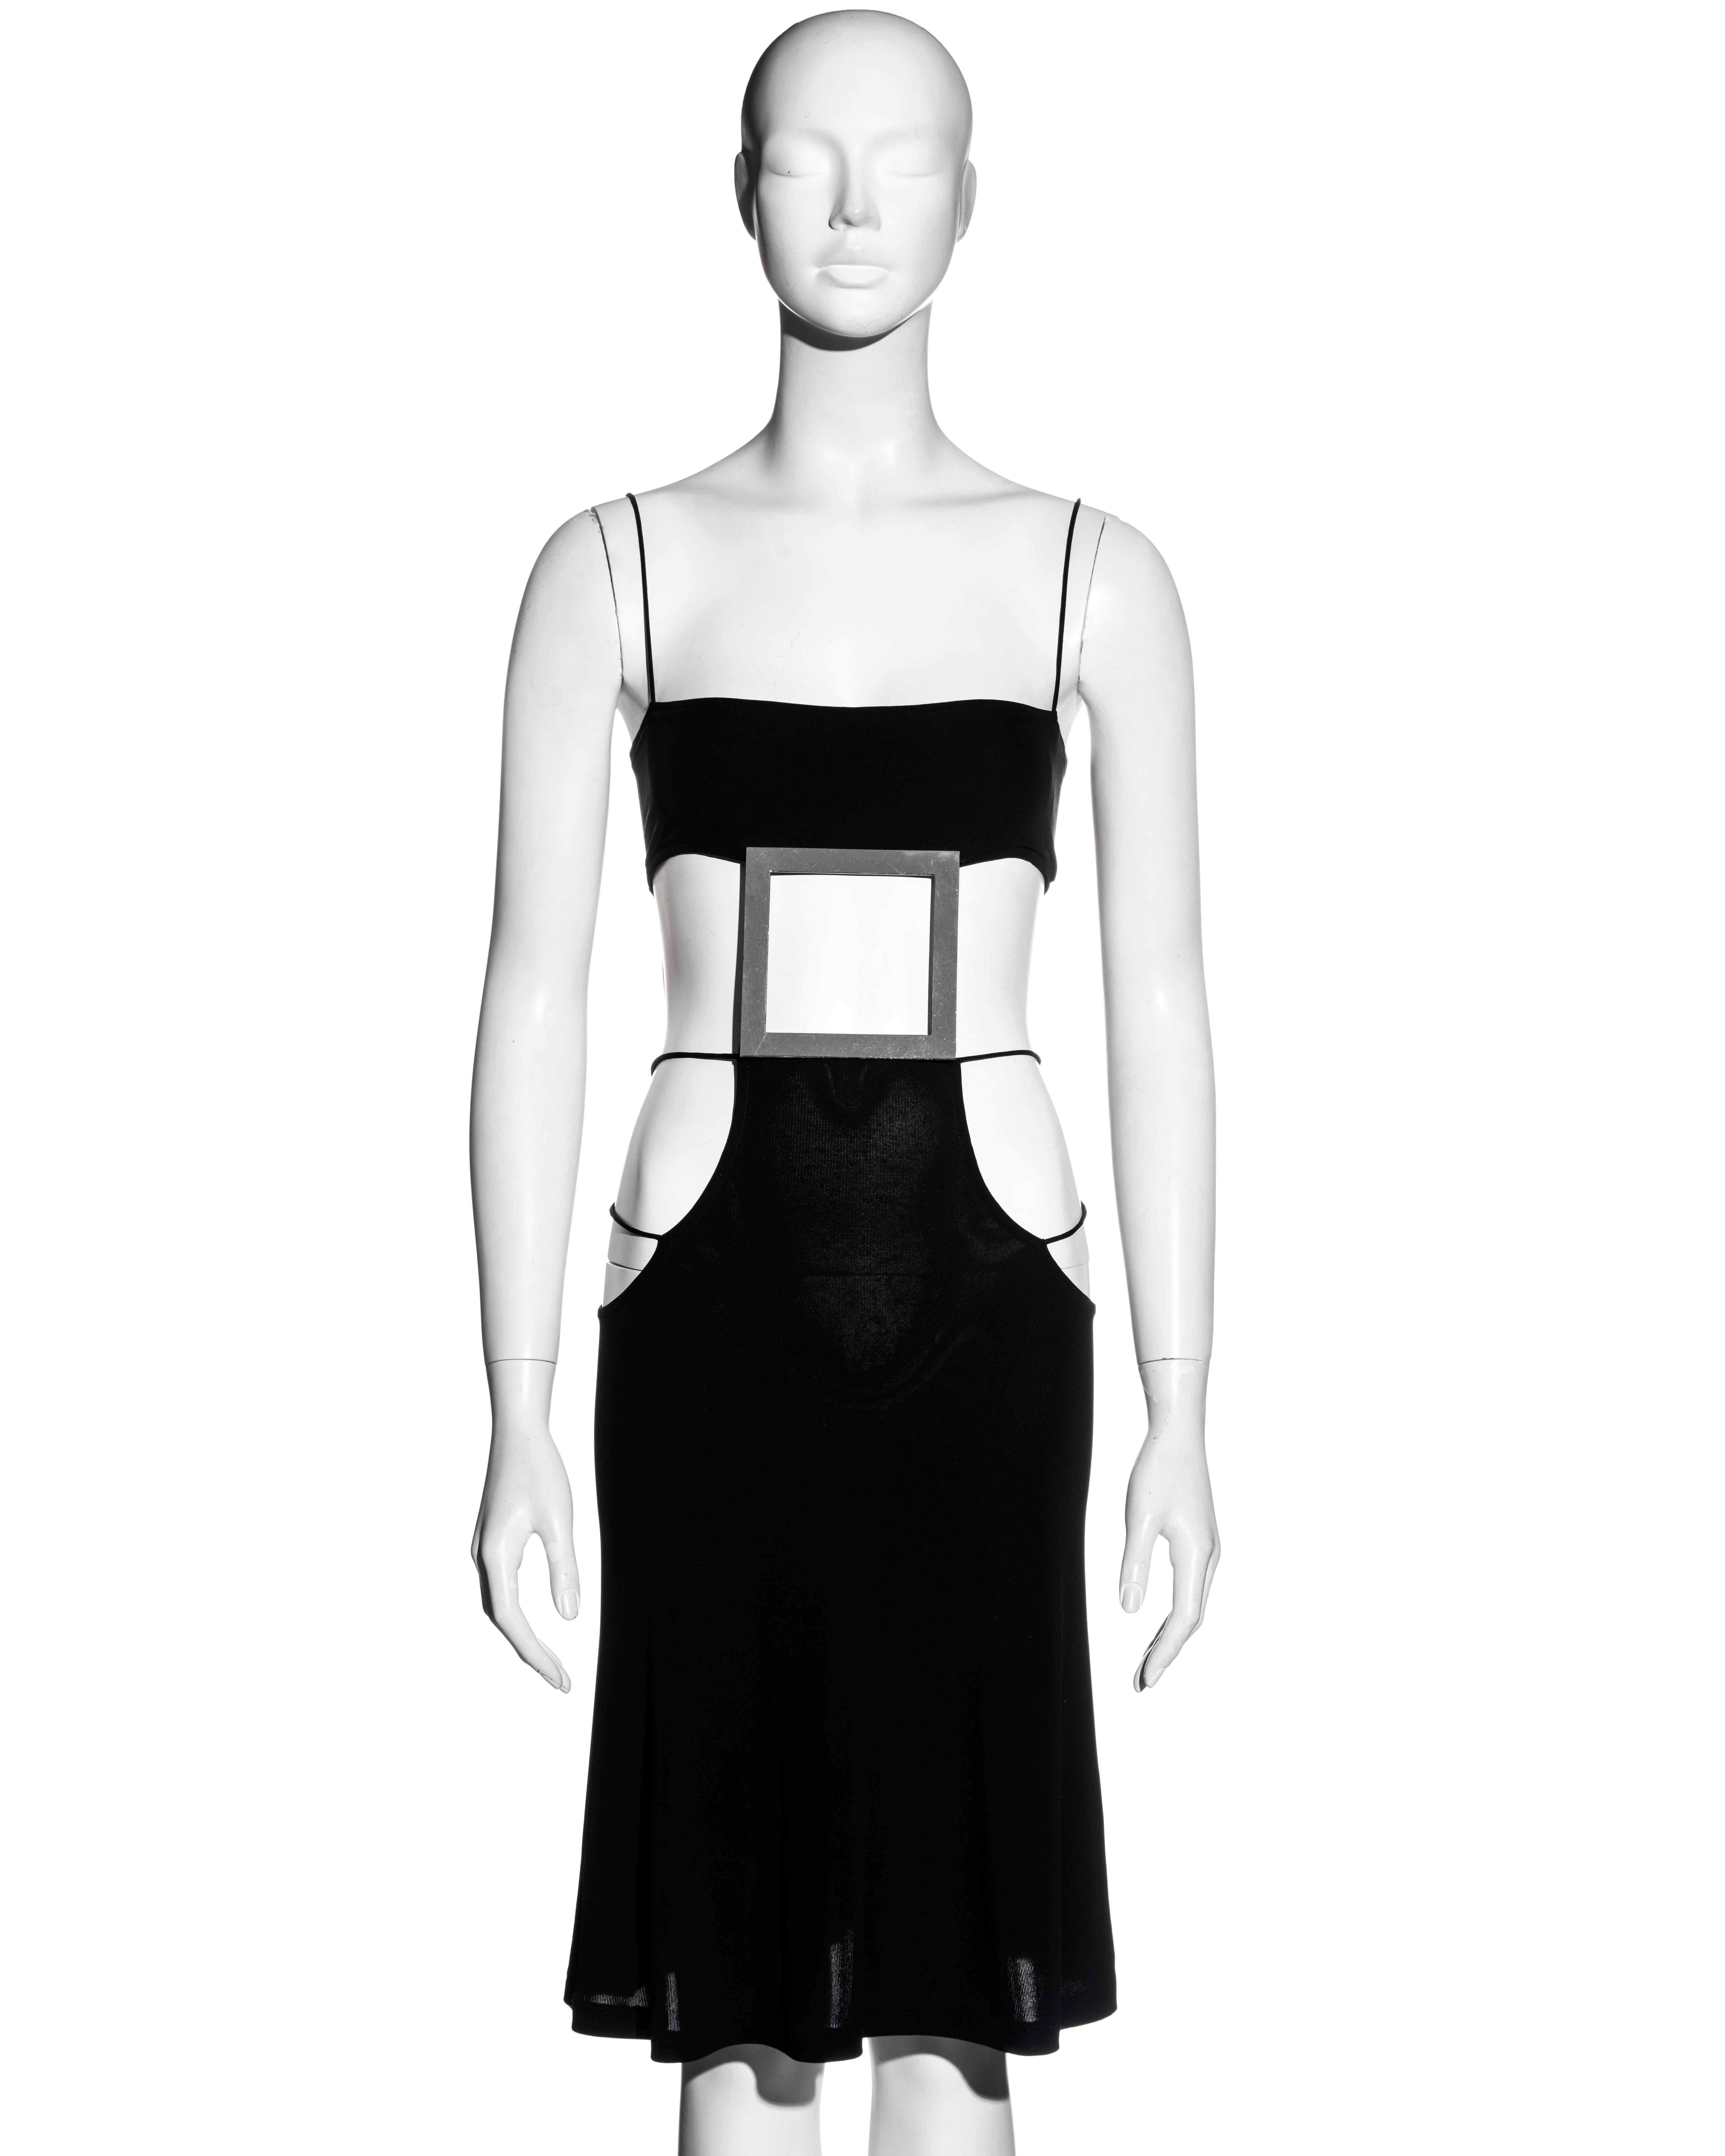 ▪ Paco Rabanne rare black rayon strappy evening dress 
▪ Square mirror plate with cut-out 
▪ Bra-top 
▪ Spaghetti straps at the waist, hips, and shoulders 
▪ Cut-out sides 
▪ Knee-length skirt 
▪ Size: XS 
▪ Spring-Summer 2004